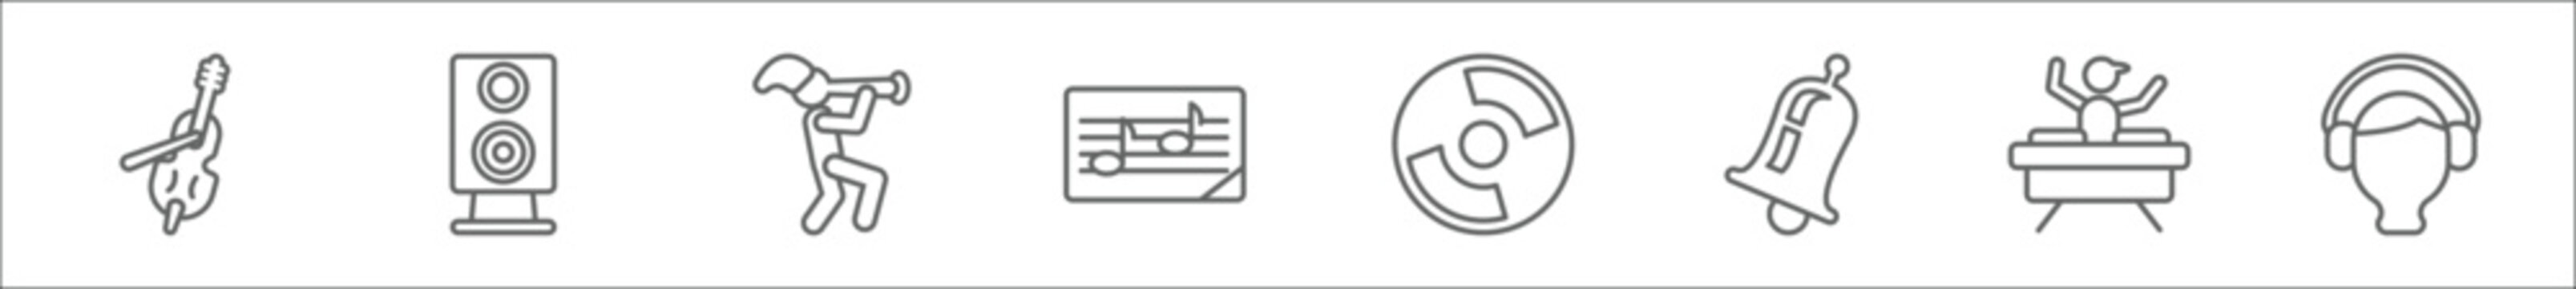 outline set of music line icons. linear vector icons such as classical music, vintage loudspeaker, pied piper of hamelin, sheet music, vynil, bell, dj hand motion, boy with headphones